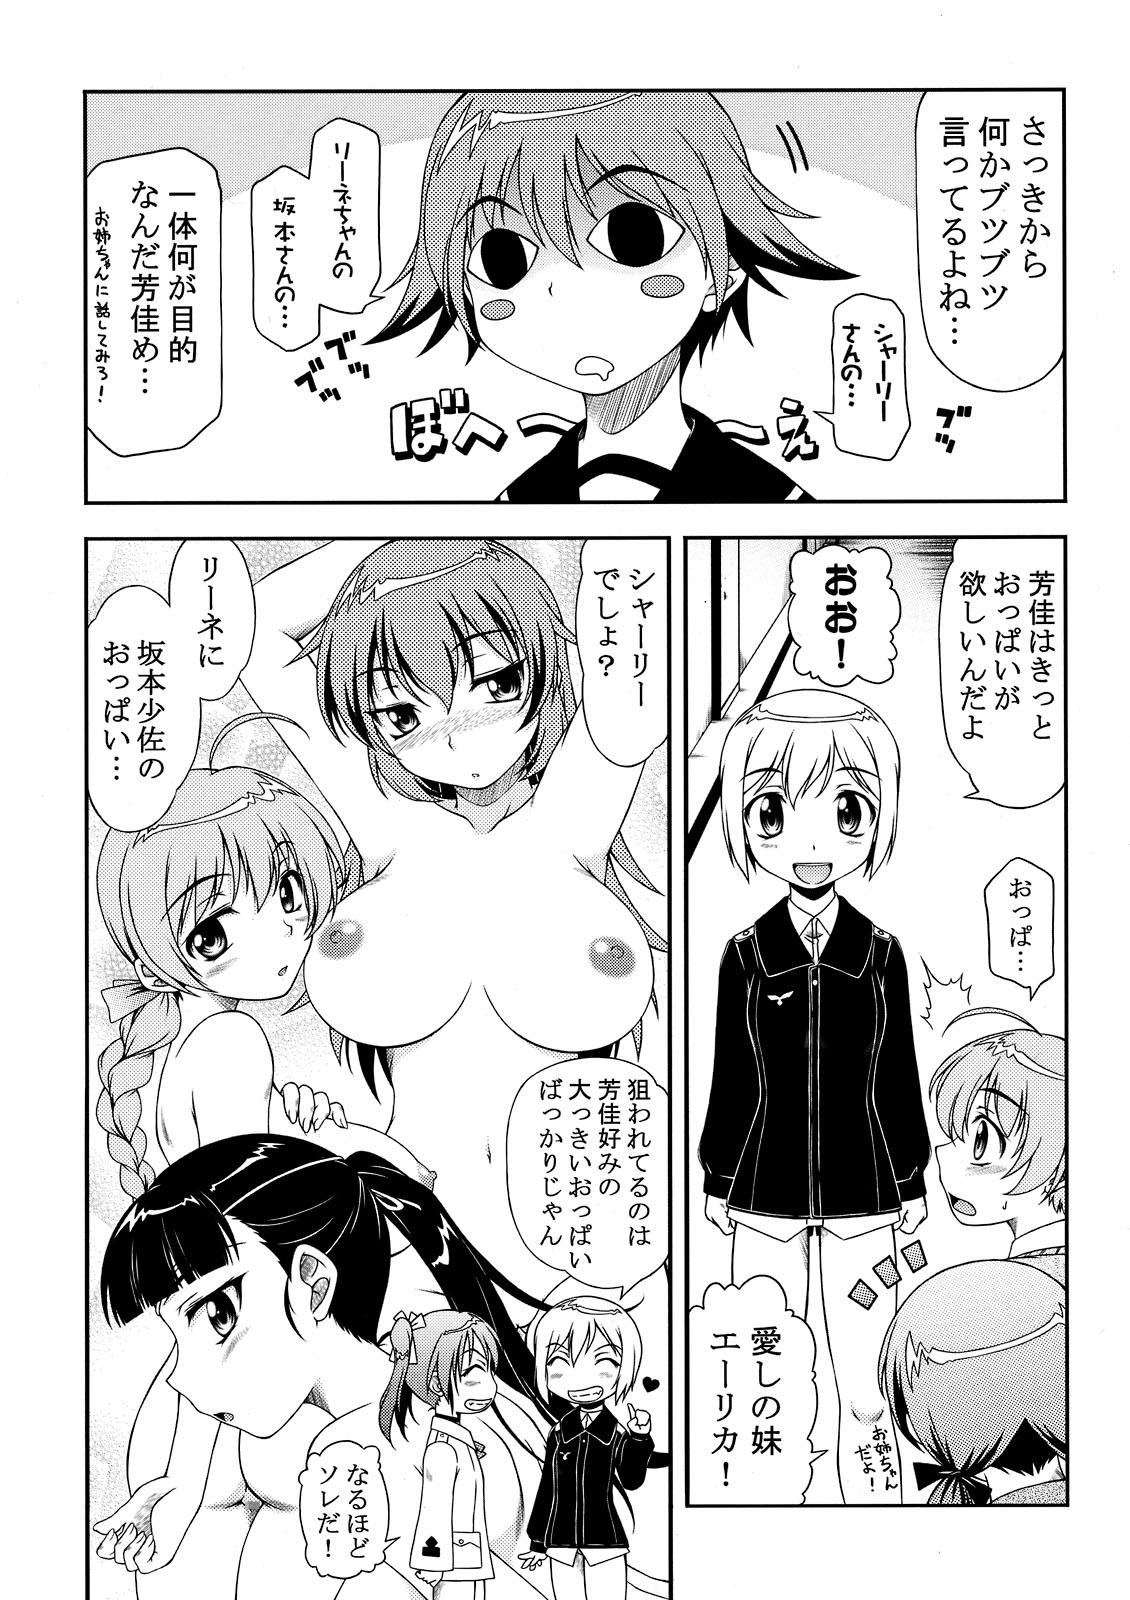 Tinytits Hokyuubusshi 501 - Strike witches Special Locations - Page 8